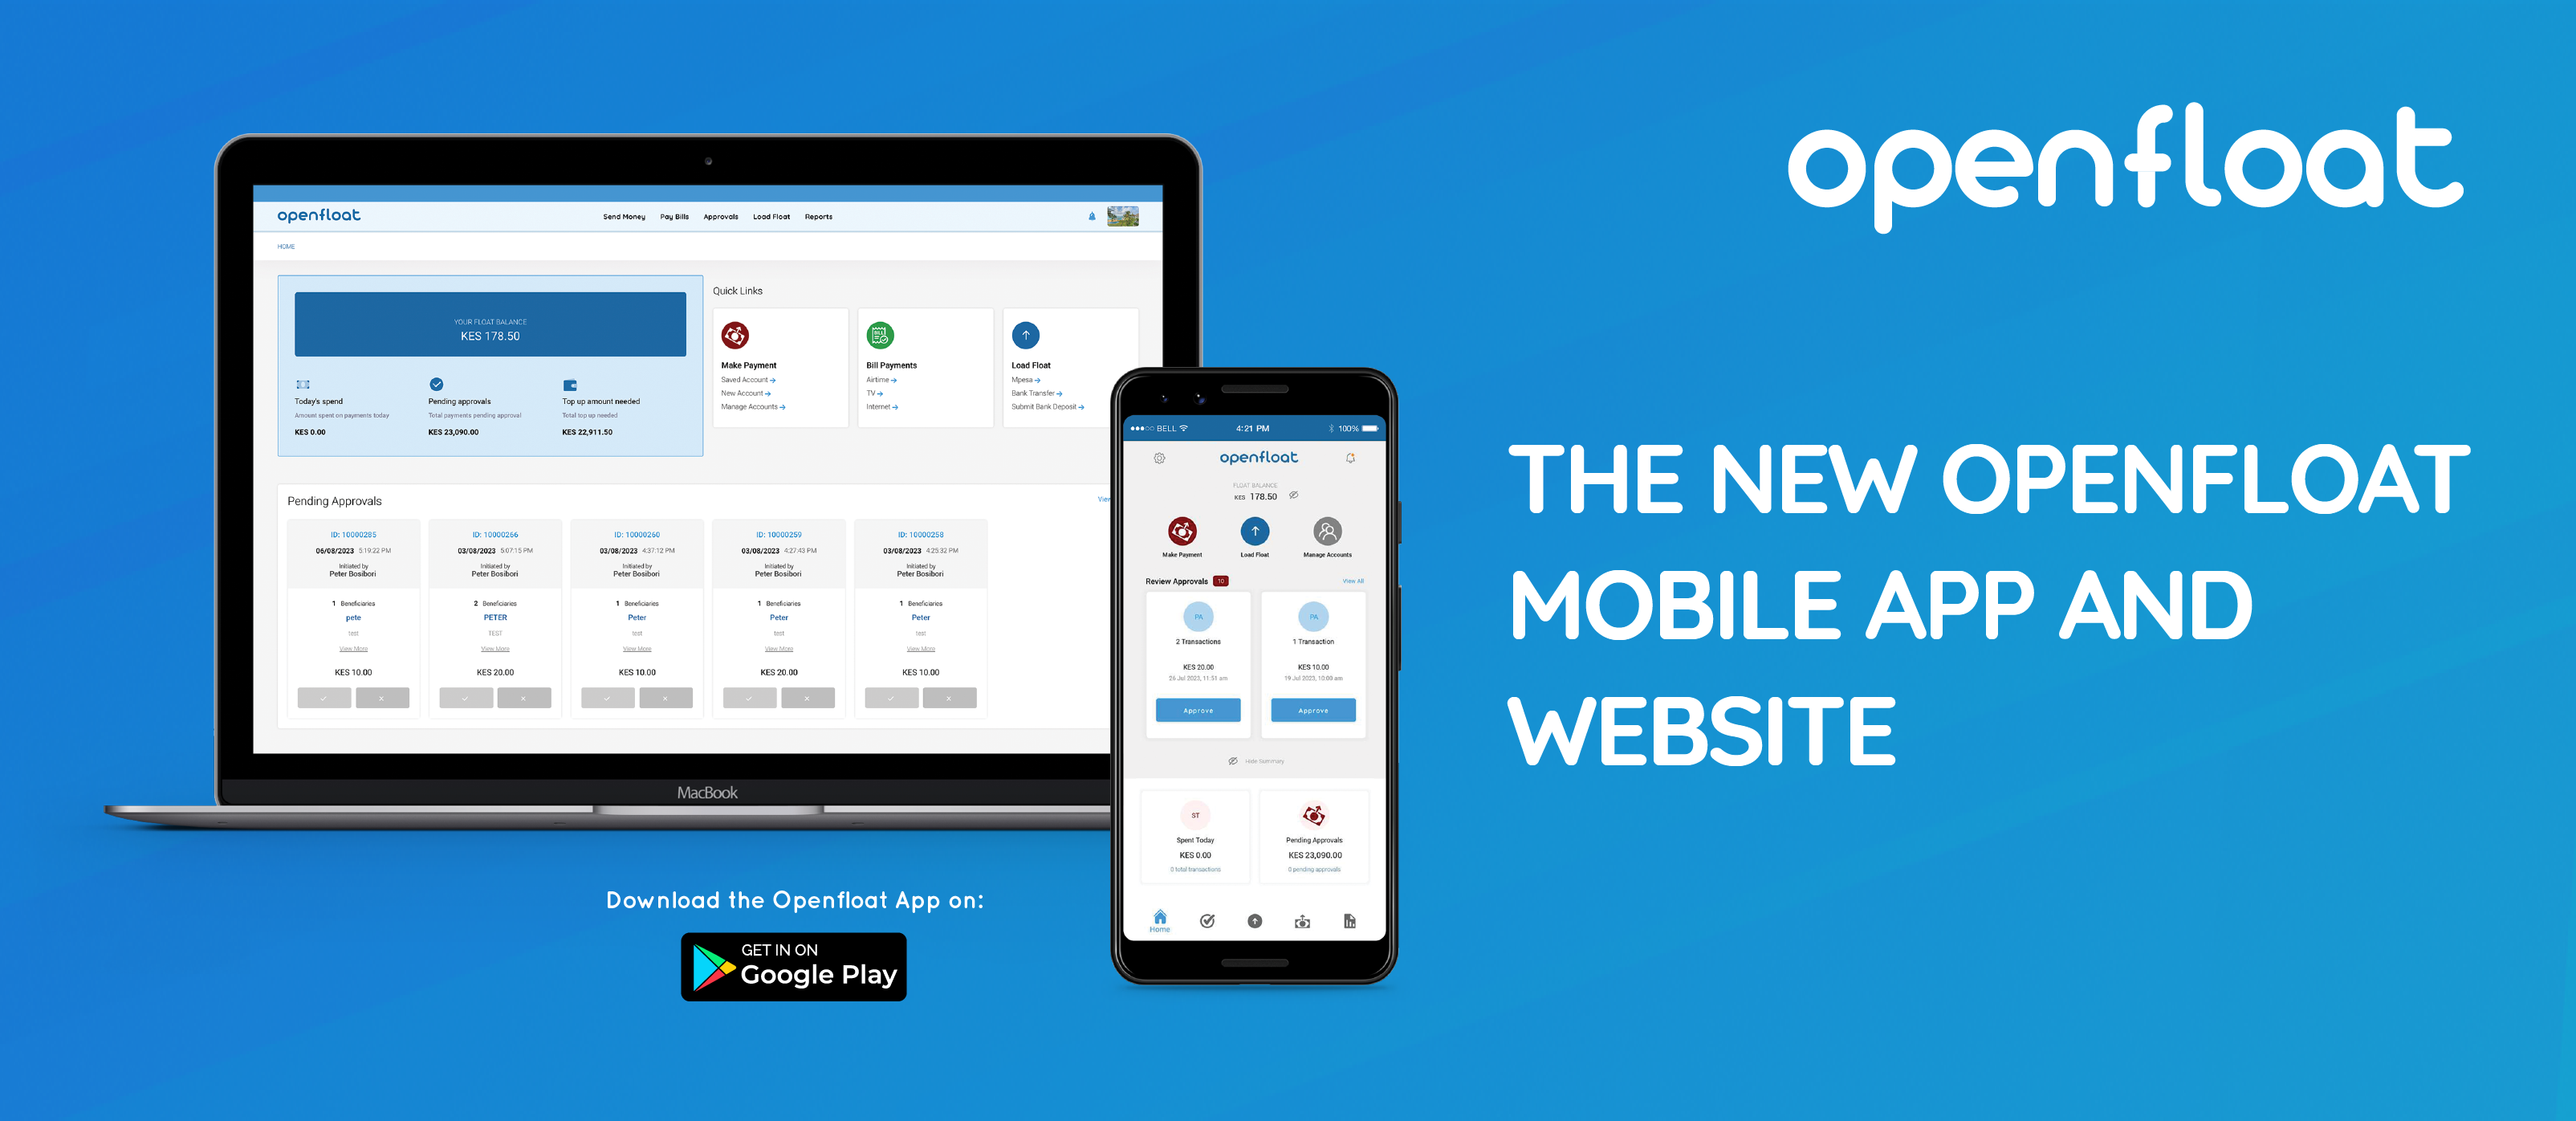 Pesapal Announces the Biggest Upgrade to Openfloat, introducing a Mobile App and a Revamped Website